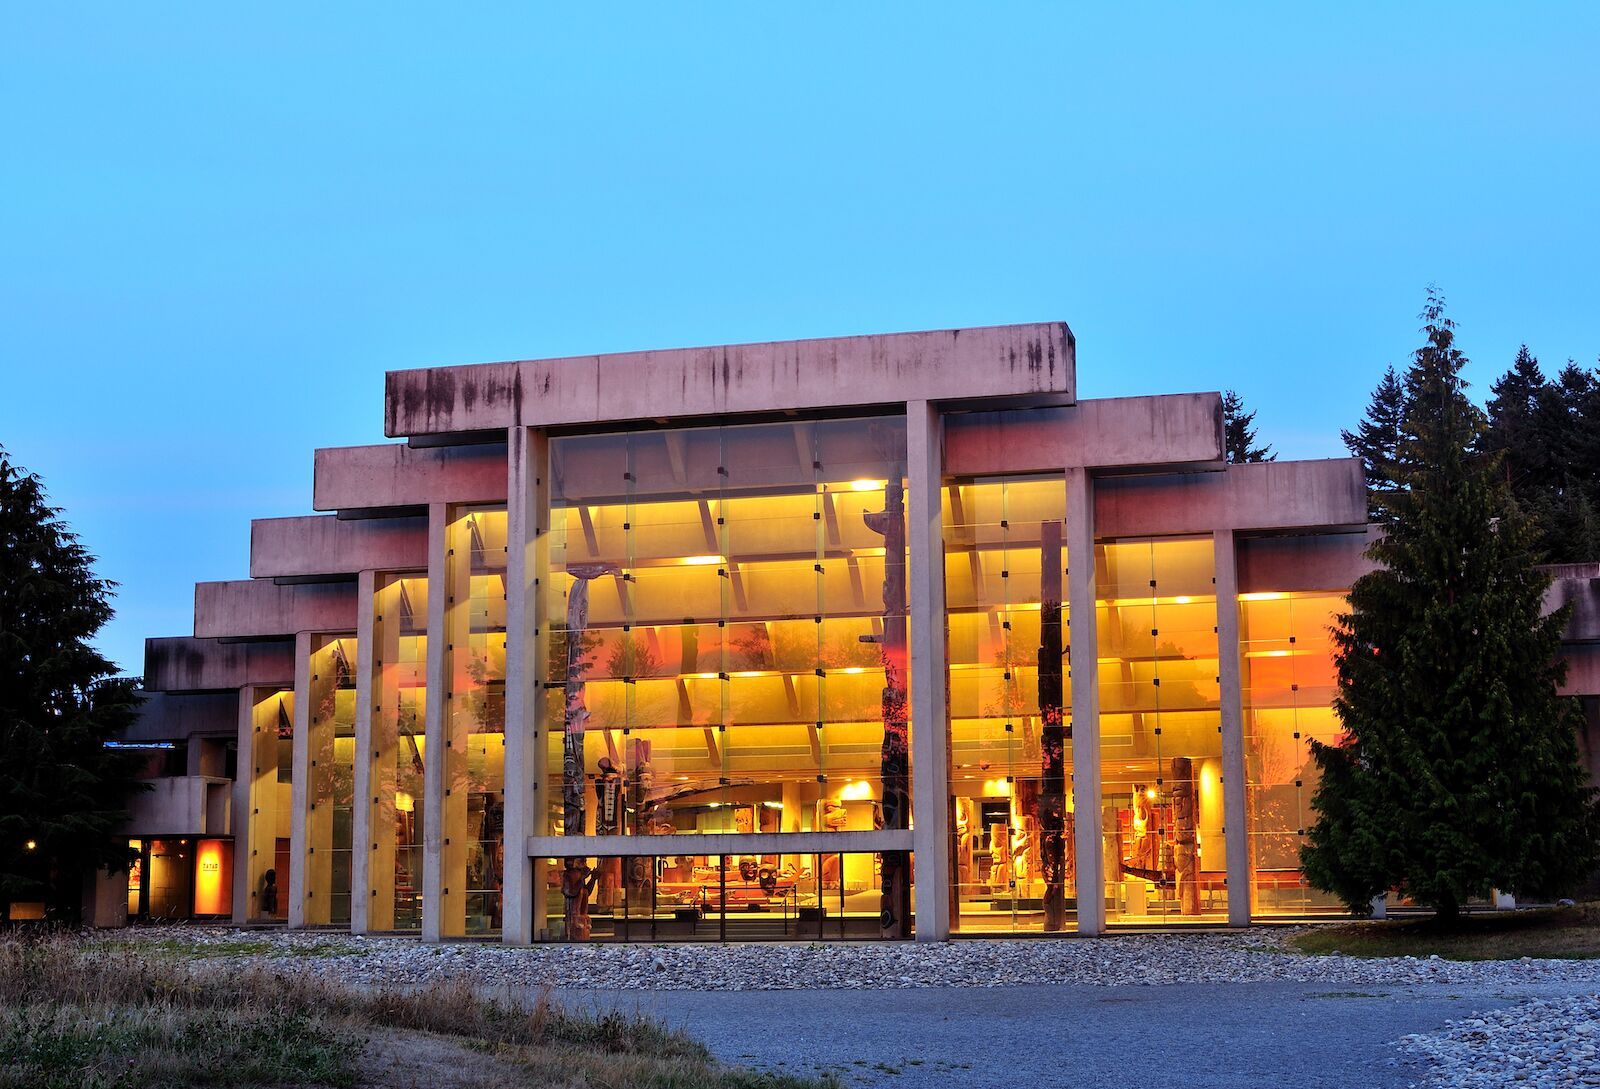 The Museum of Anthropology in Vancouver, Canada